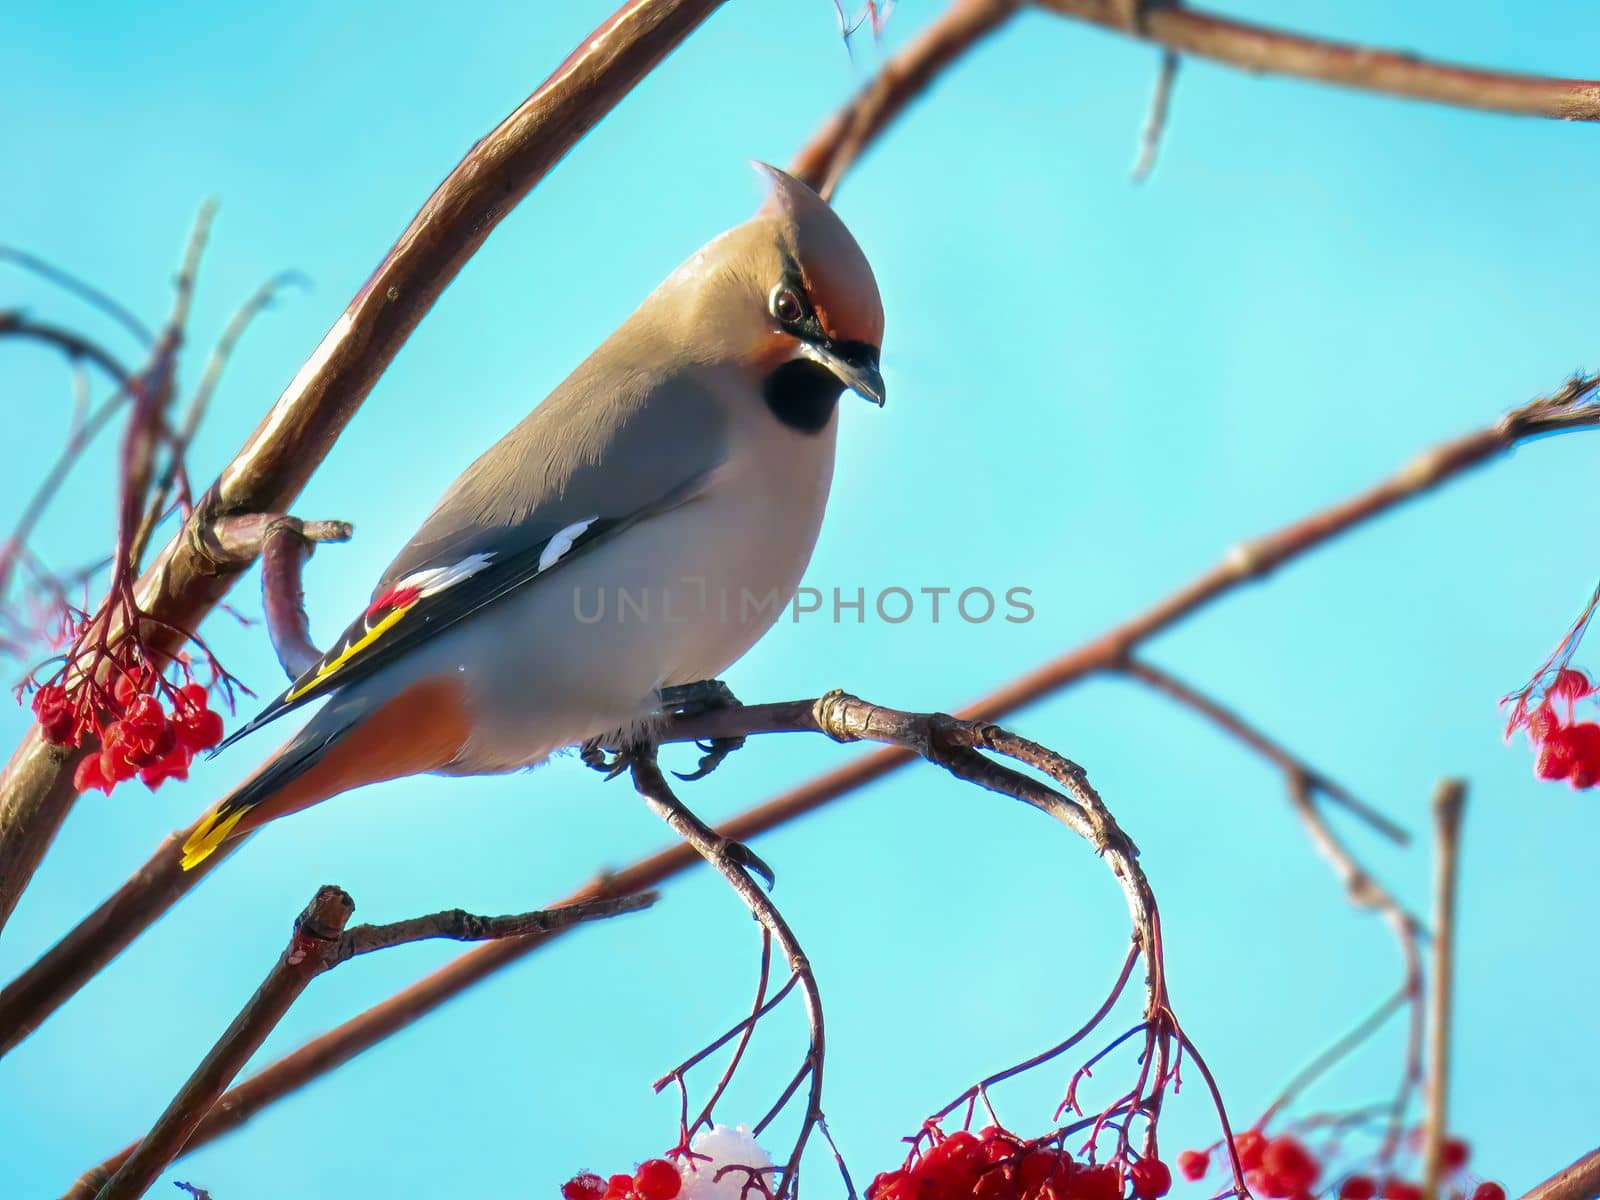 A Bohemian waxwing, starling-sized passerine bird that breeds in the northern forests of the Palearctic and North America. It has mainly buff-grey plumage, black face markings and a pointed crest.